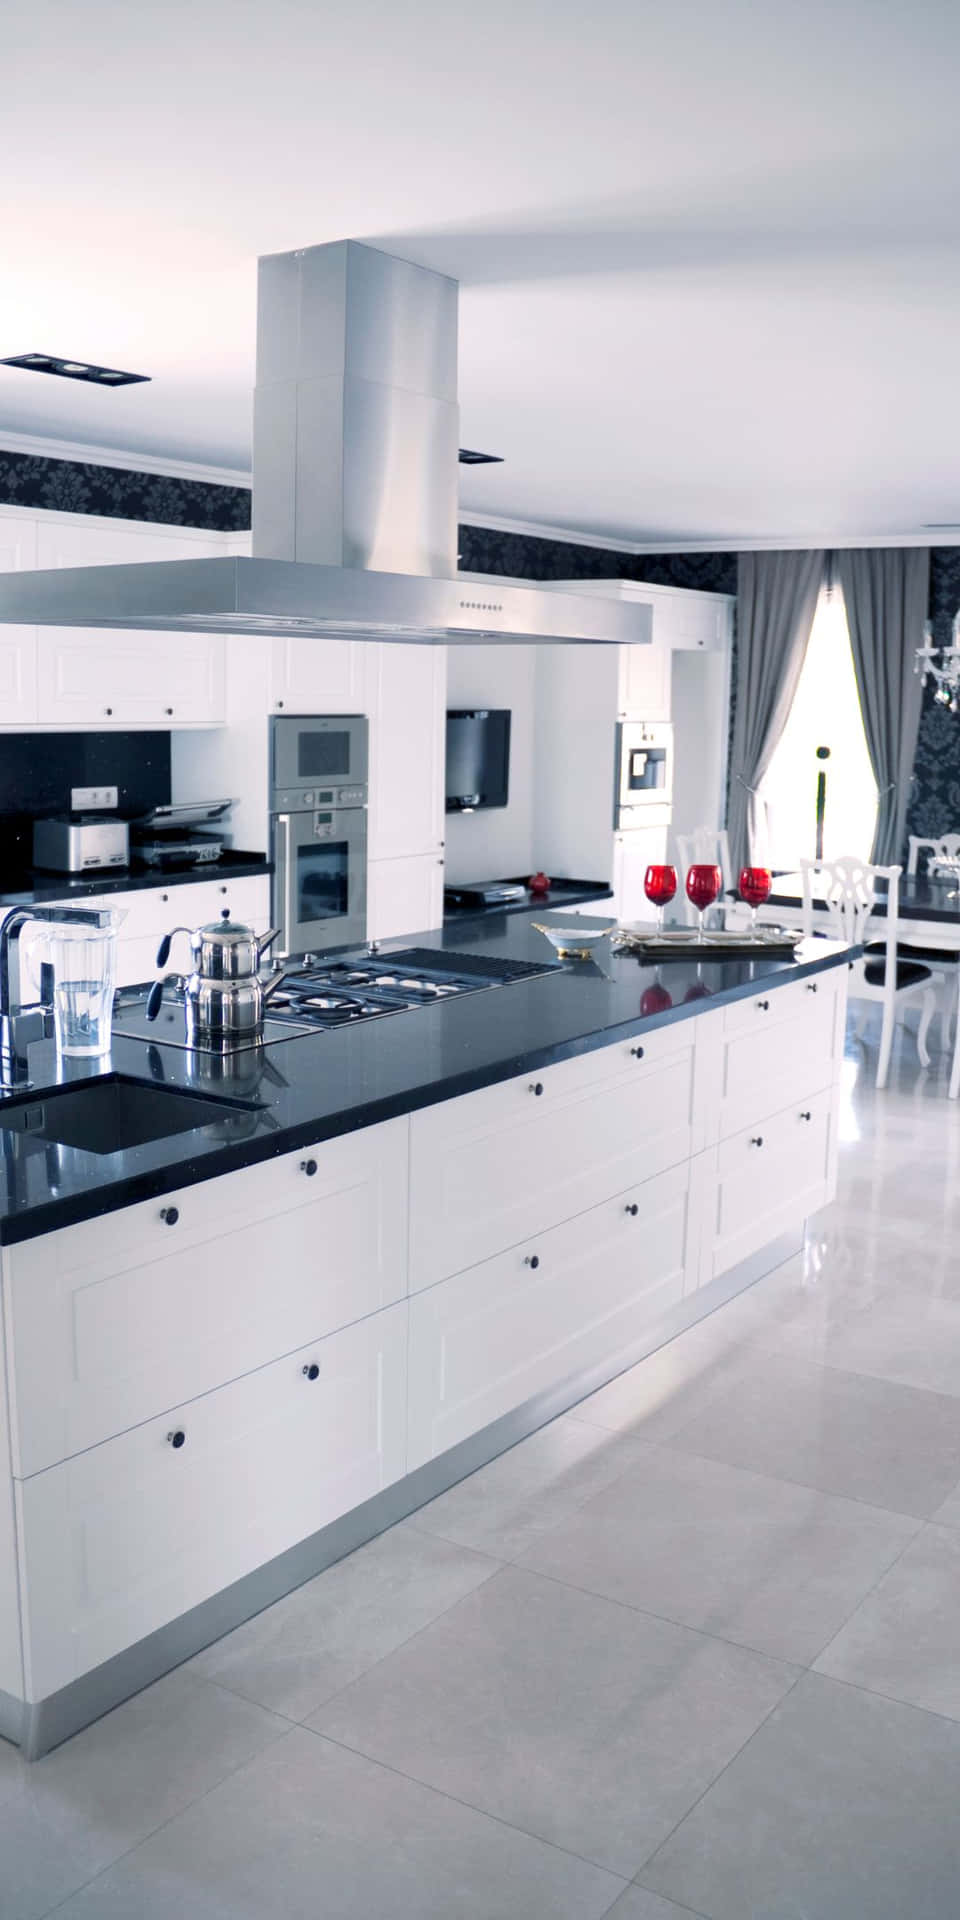 A White Kitchen With Black Counter Tops And A Black Stove